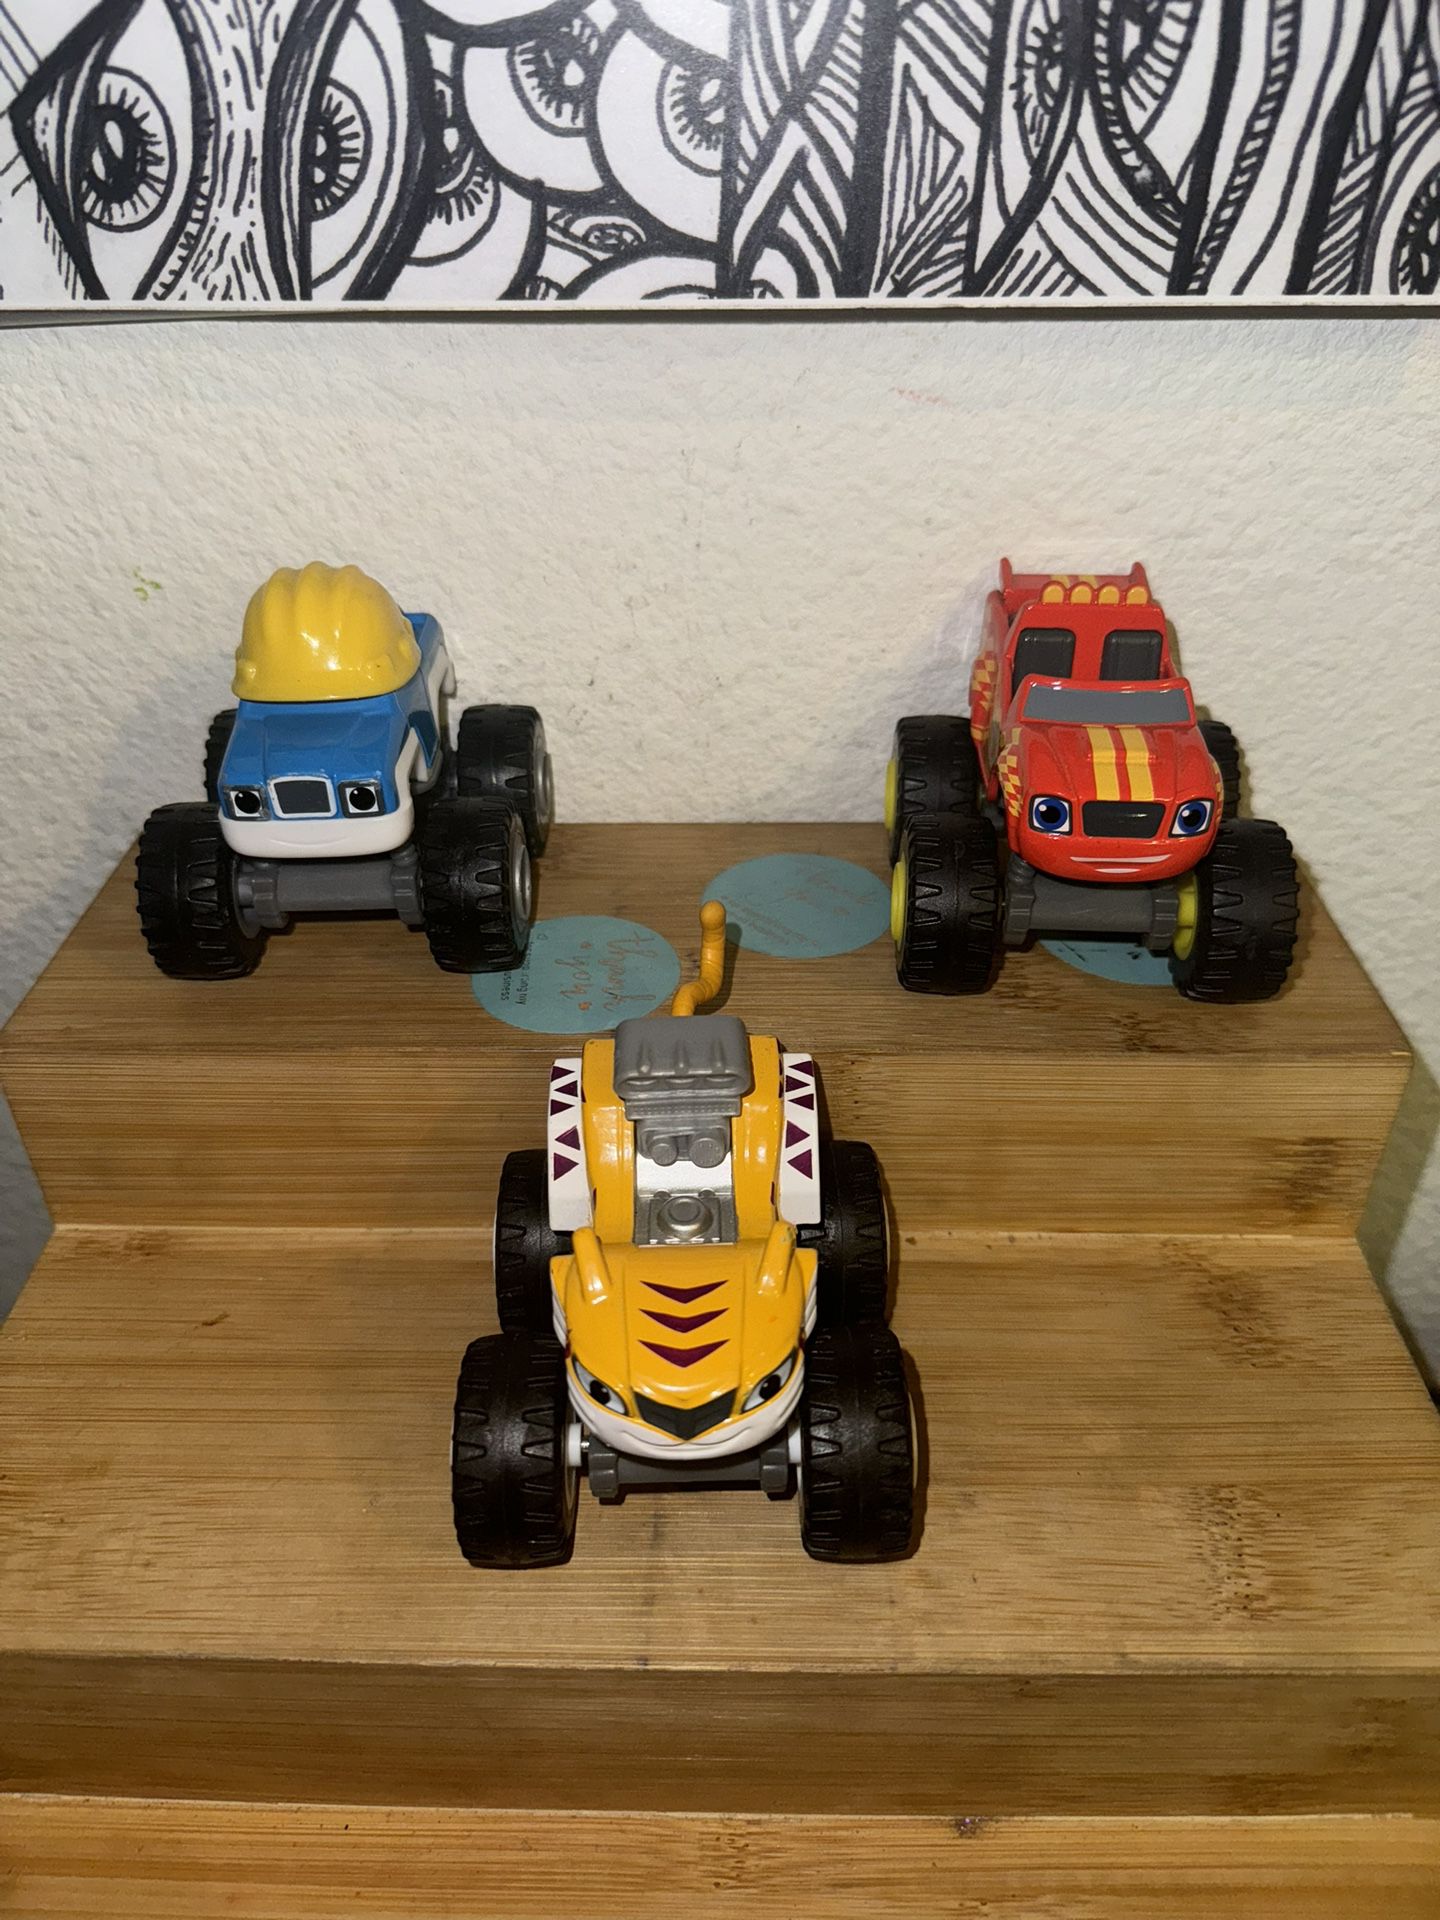 Blaze and the Monster Machines cars bundle Trucks